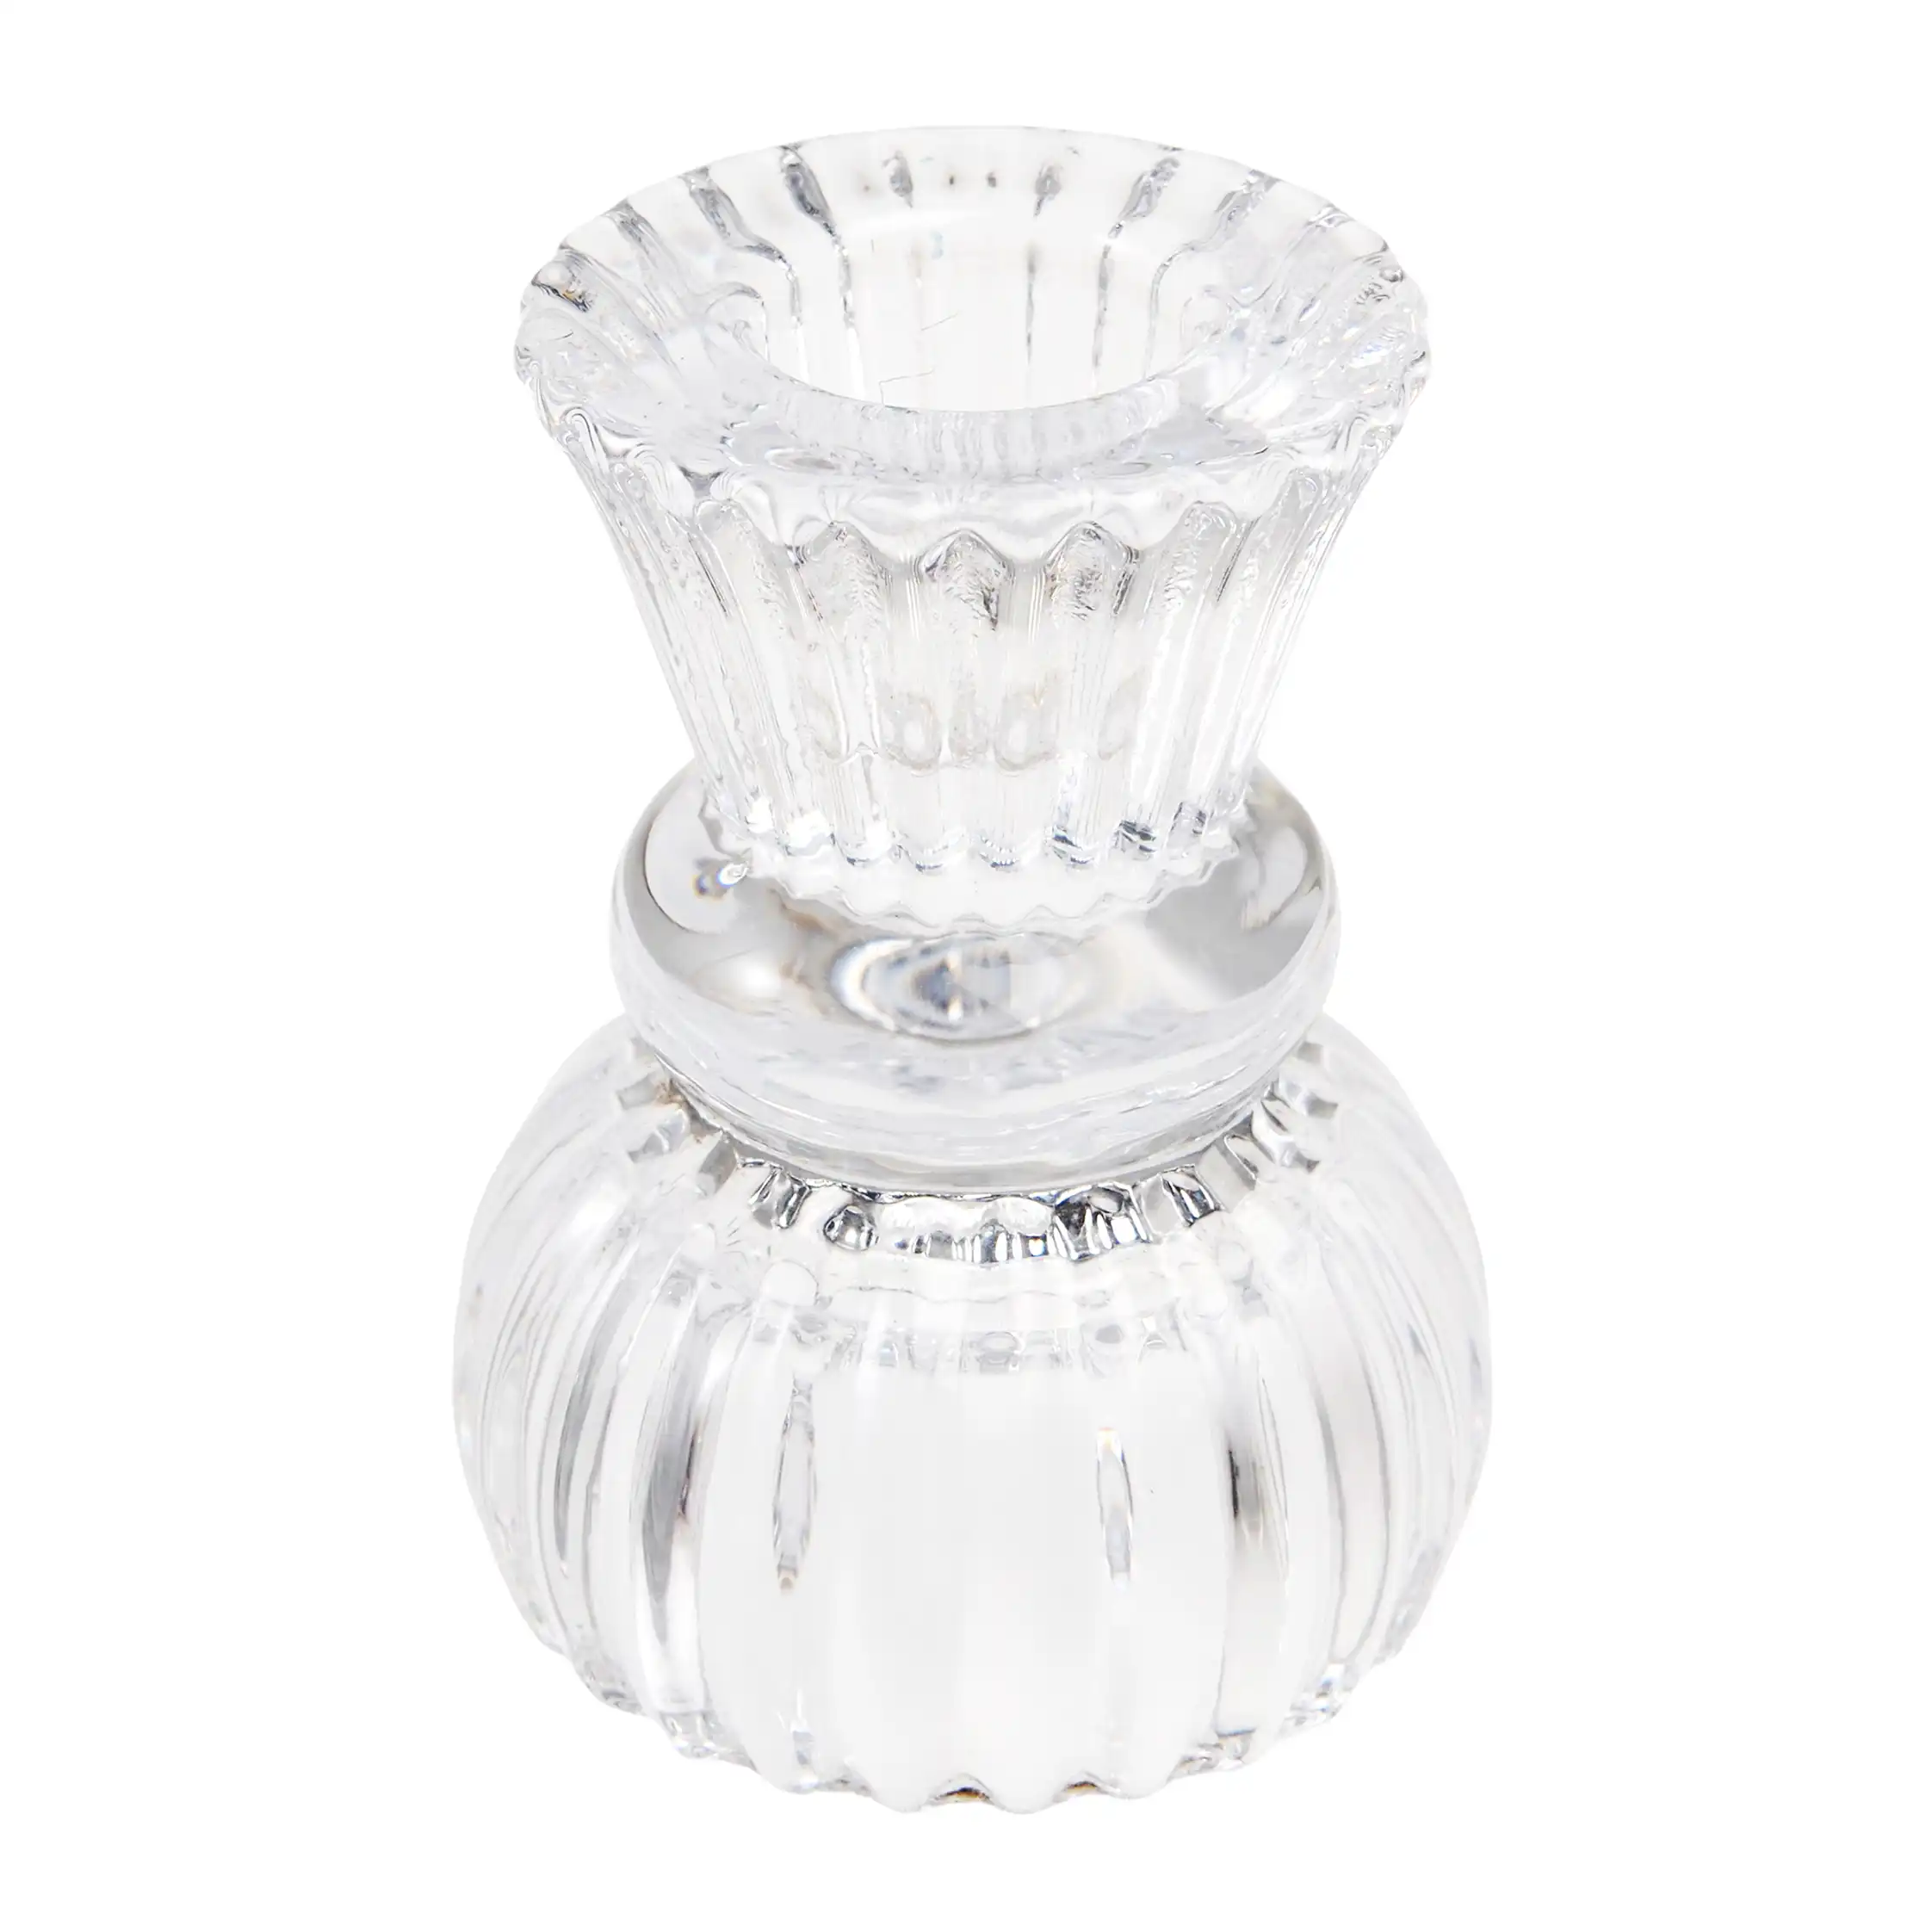 double ended glass candle holder - clear